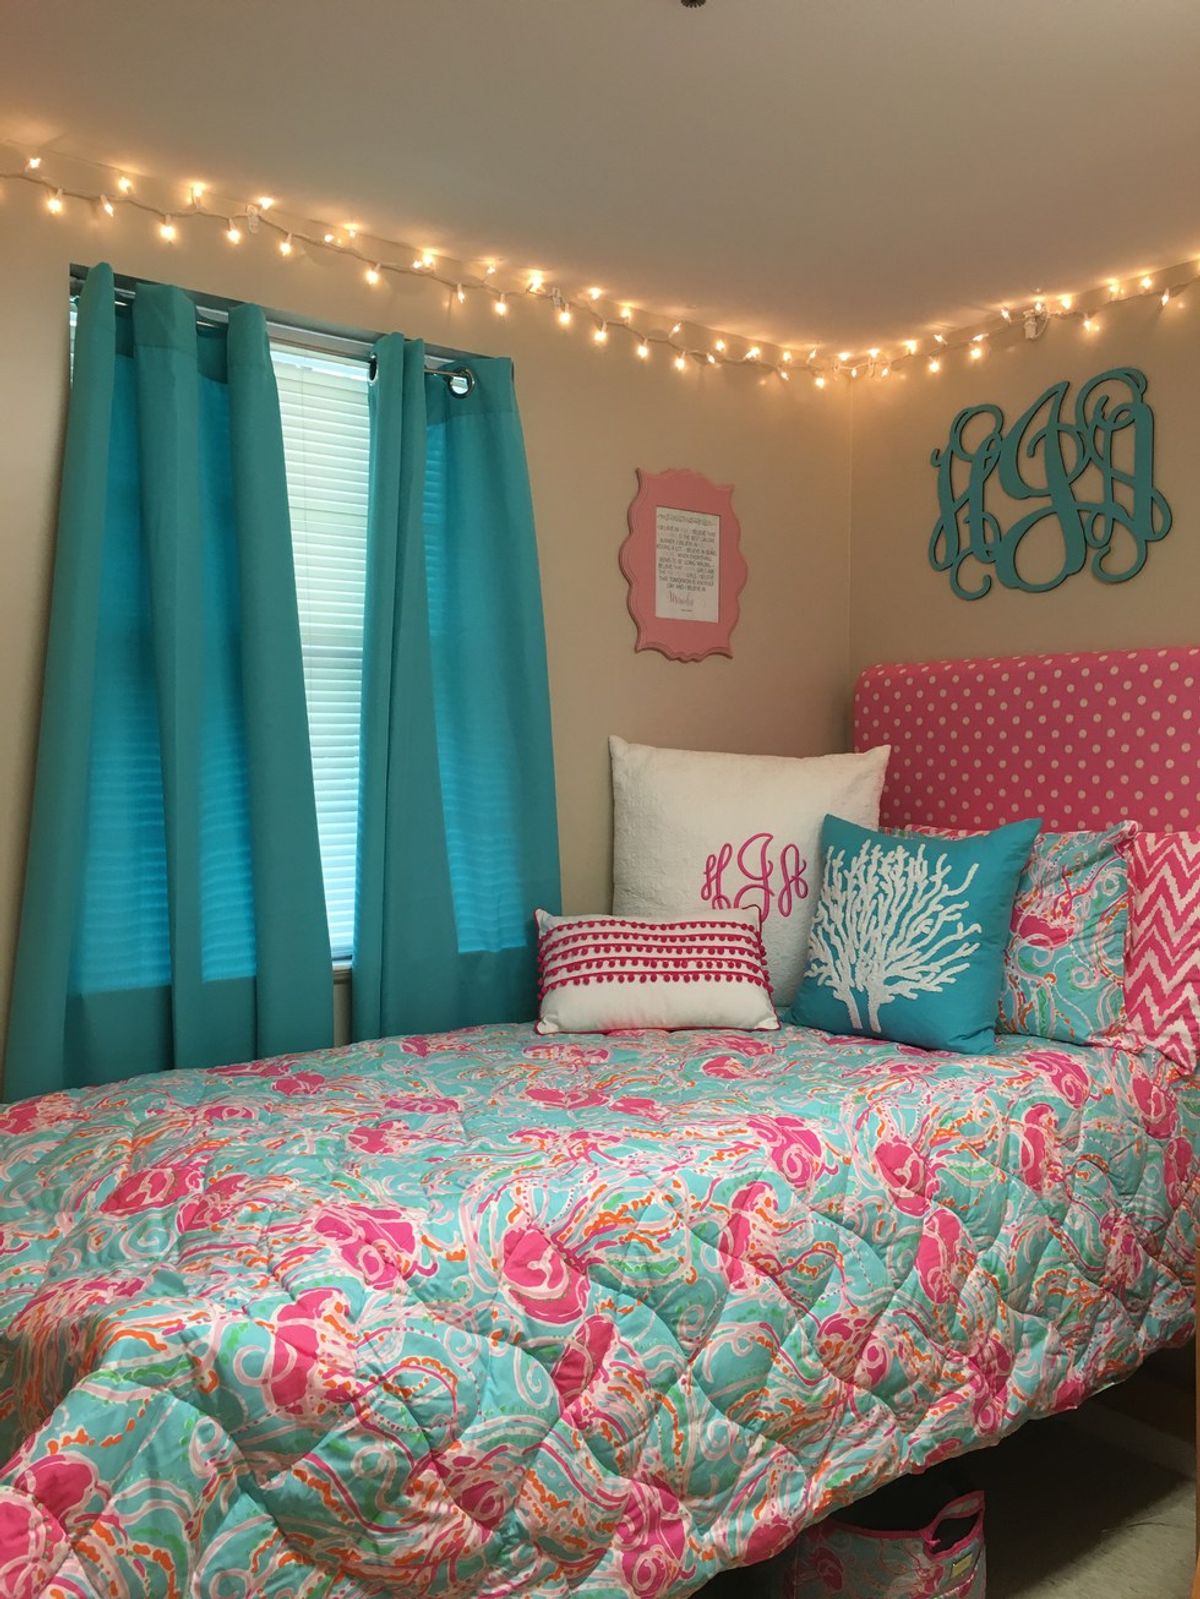 5 Tips On How To Make Your Dorm Feel As Home Like As Possible